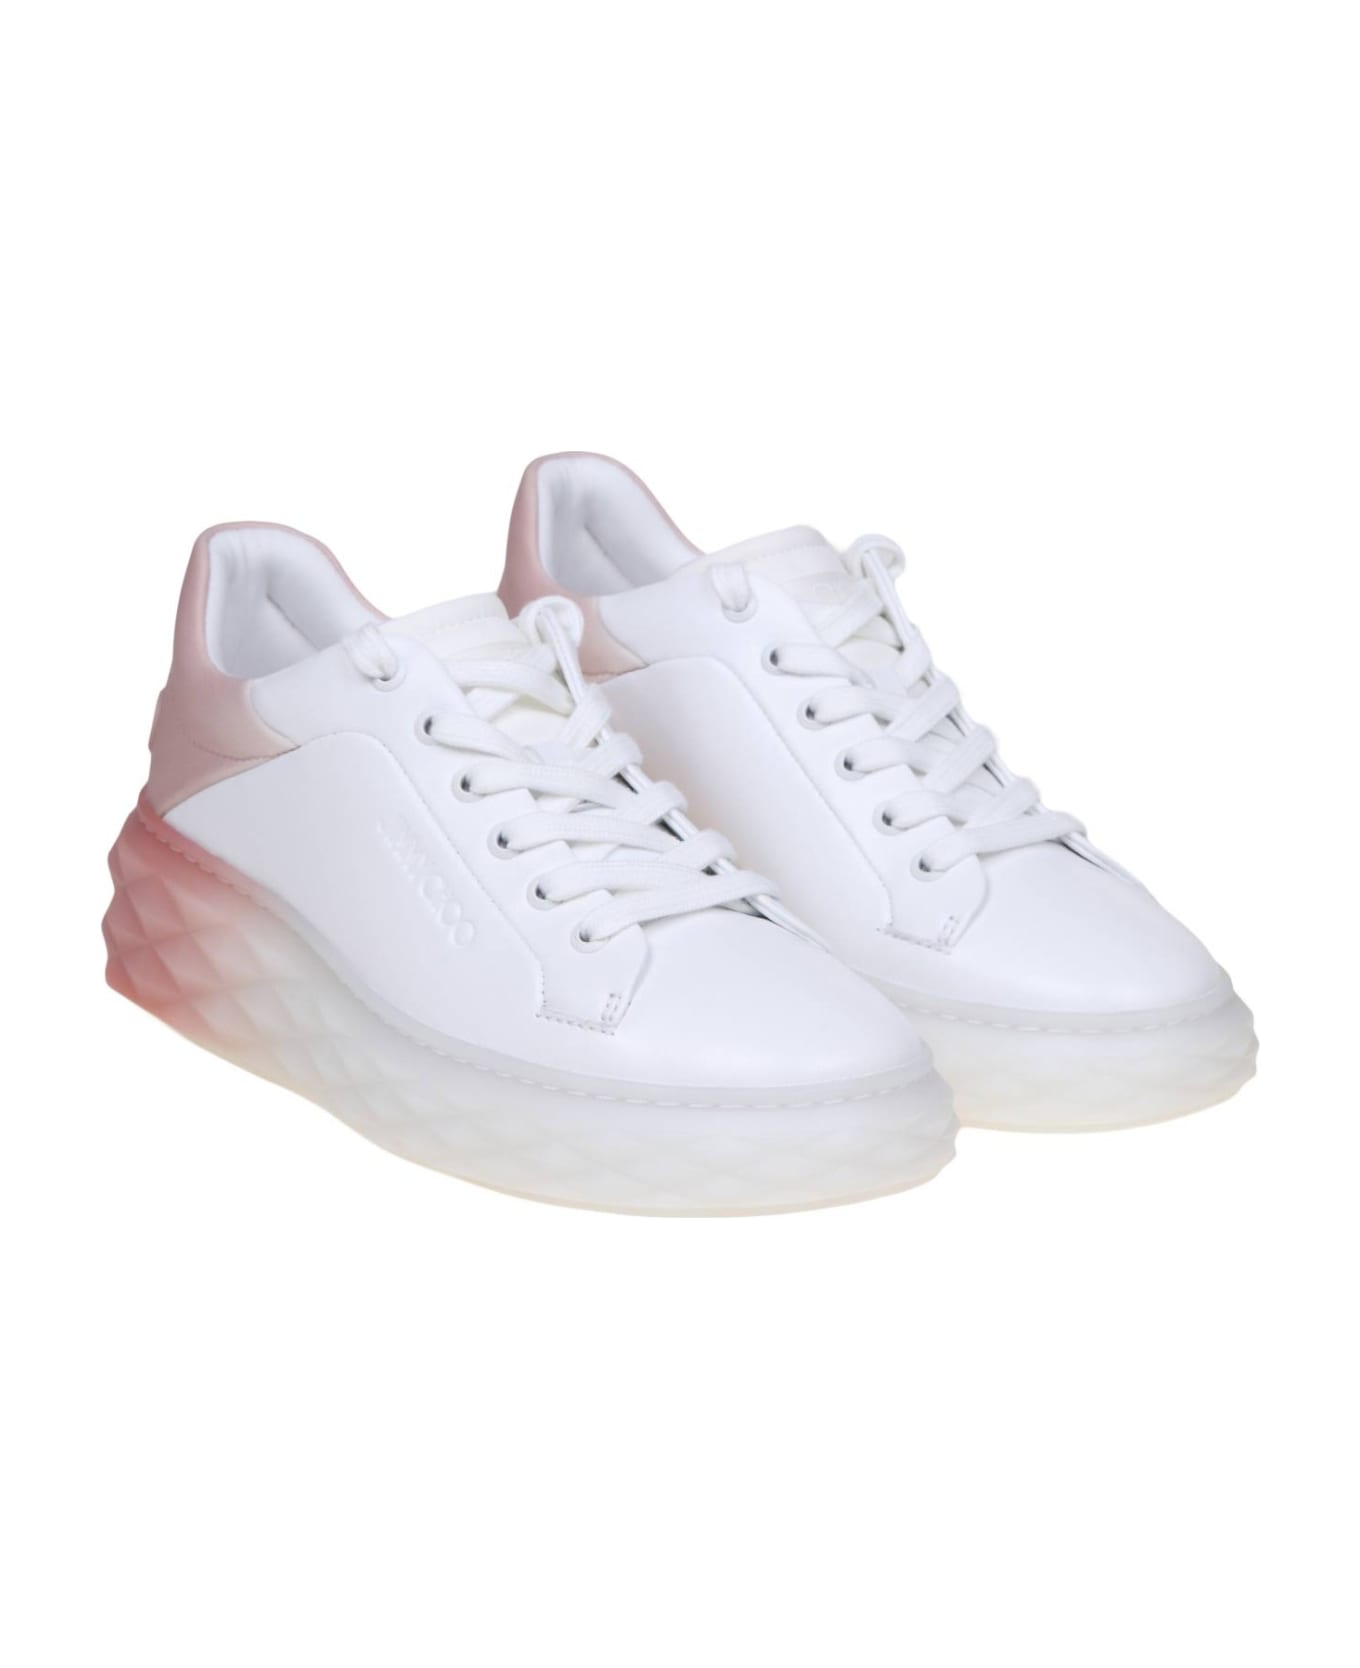 Jimmy Choo Diamond Maxi Sneakers In White And Pink Leather - White Black Mix